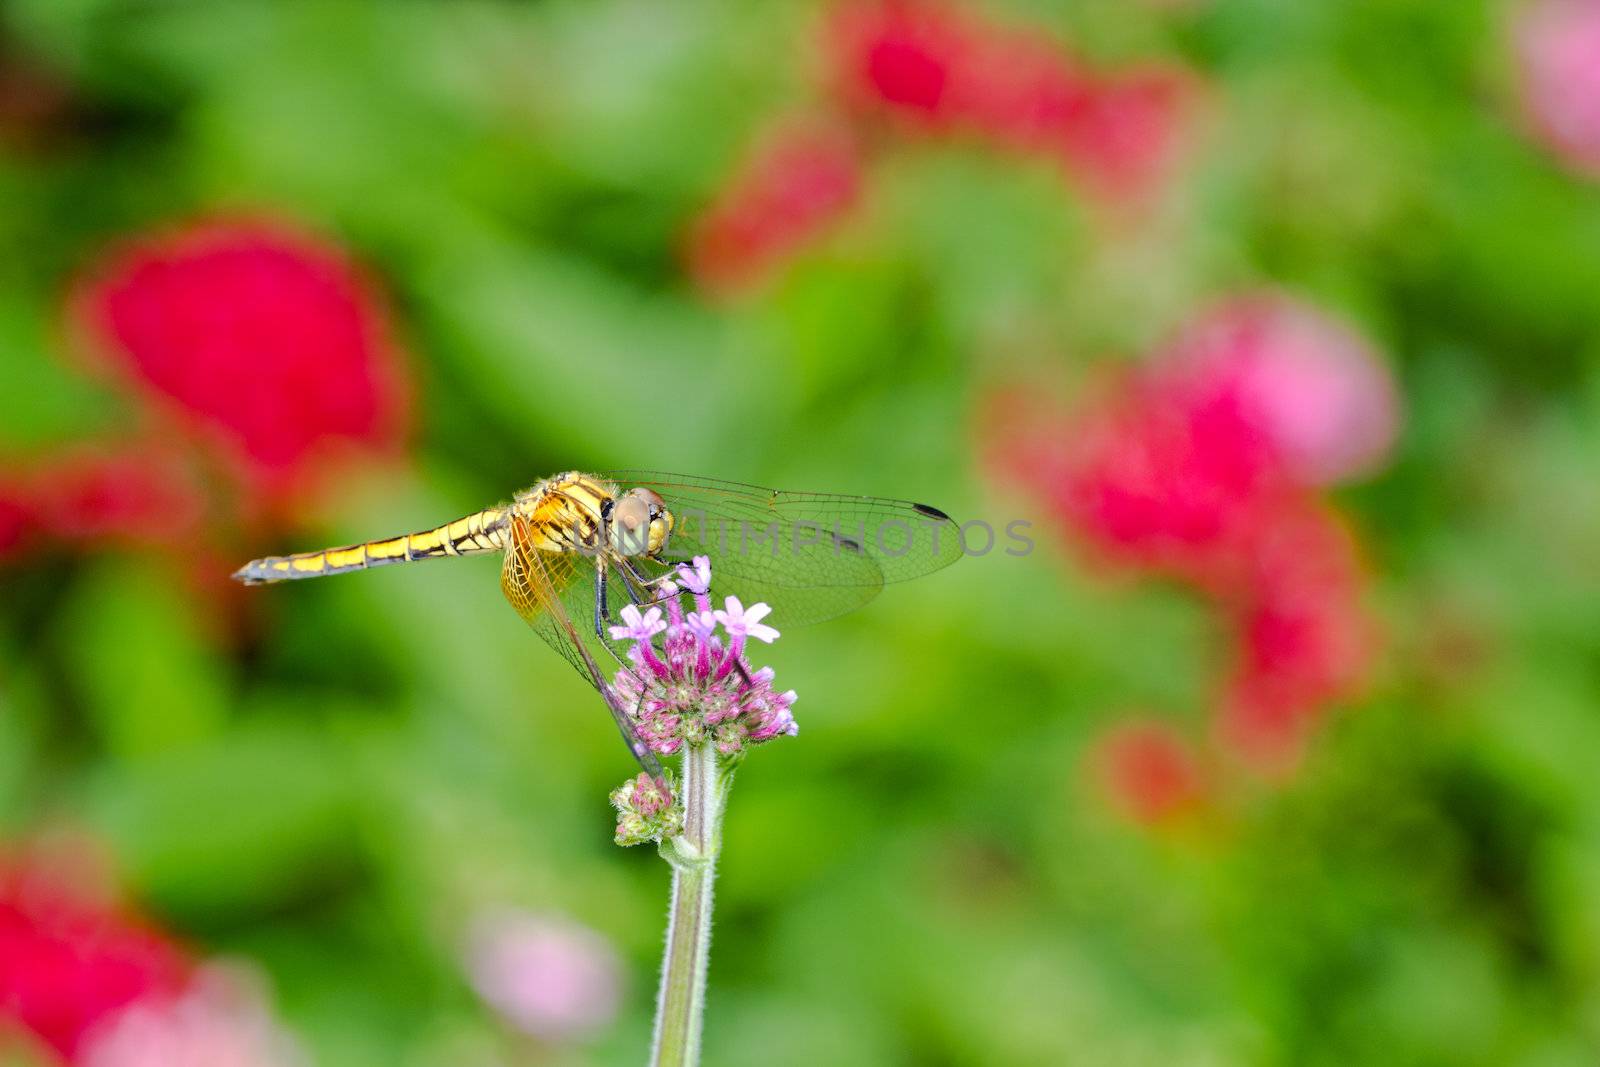 Dragonfly on a panicle with colorful flower background